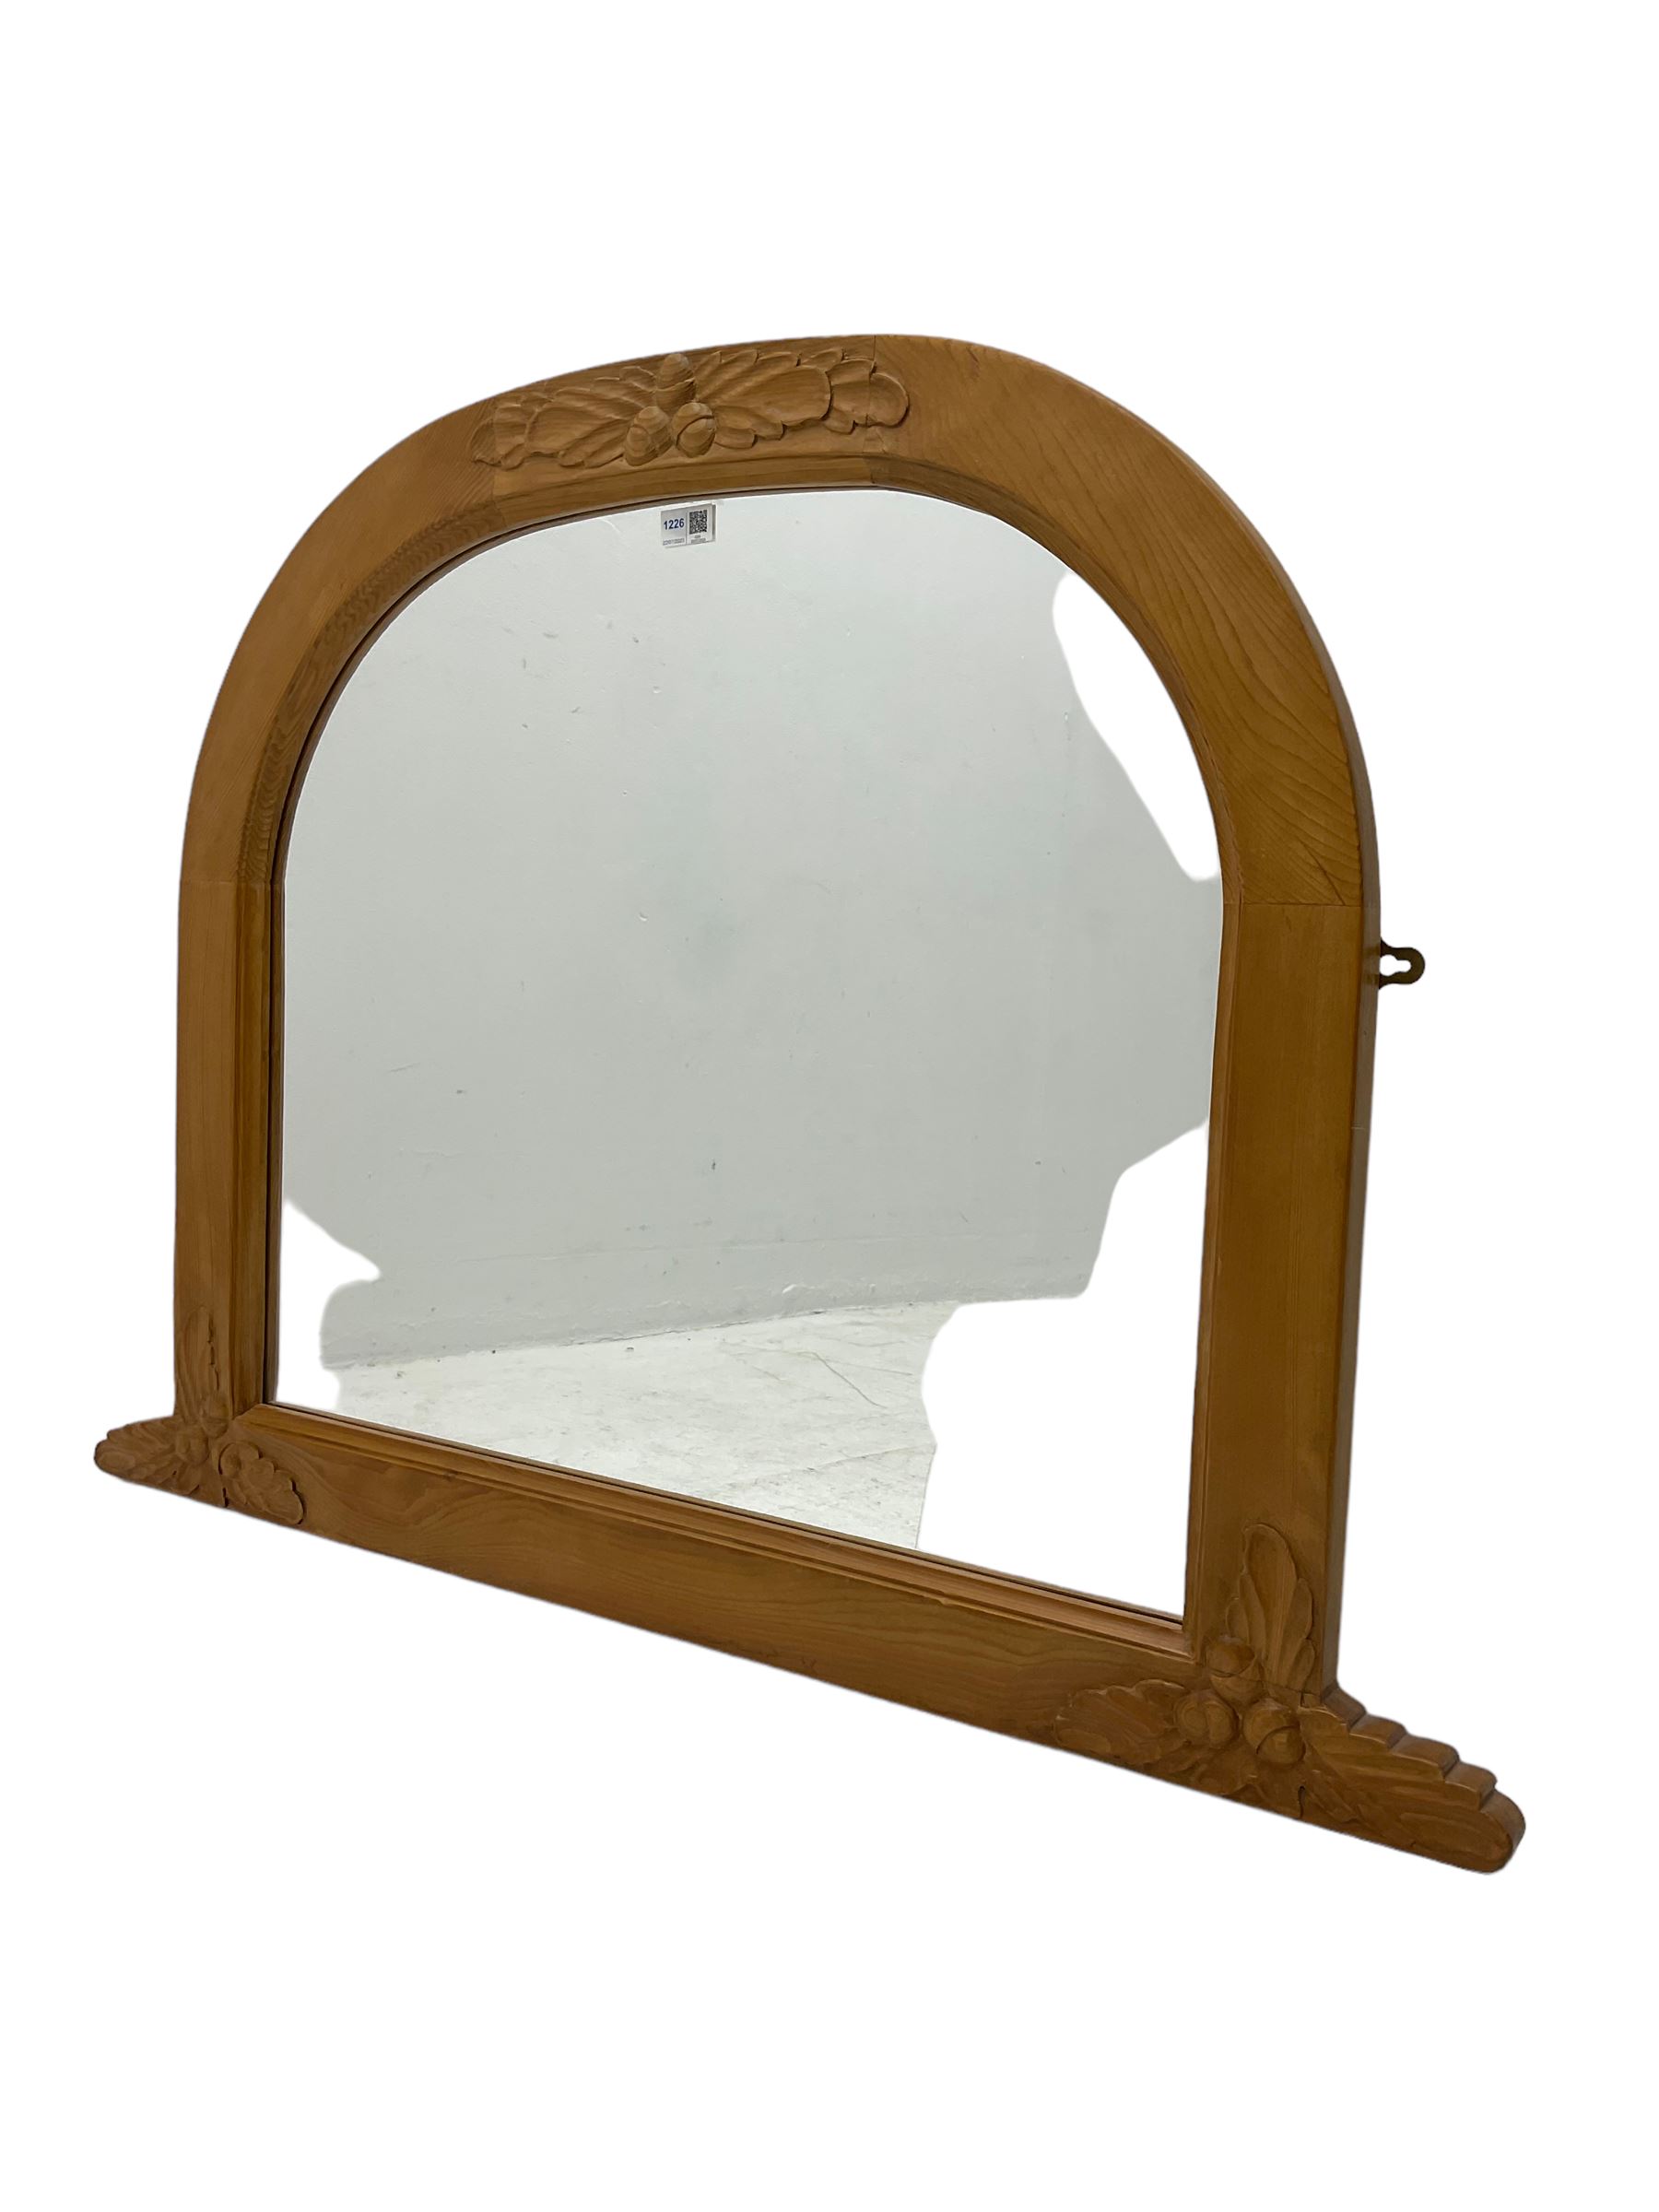 Solid pine framed overmantle mirror - Image 4 of 8